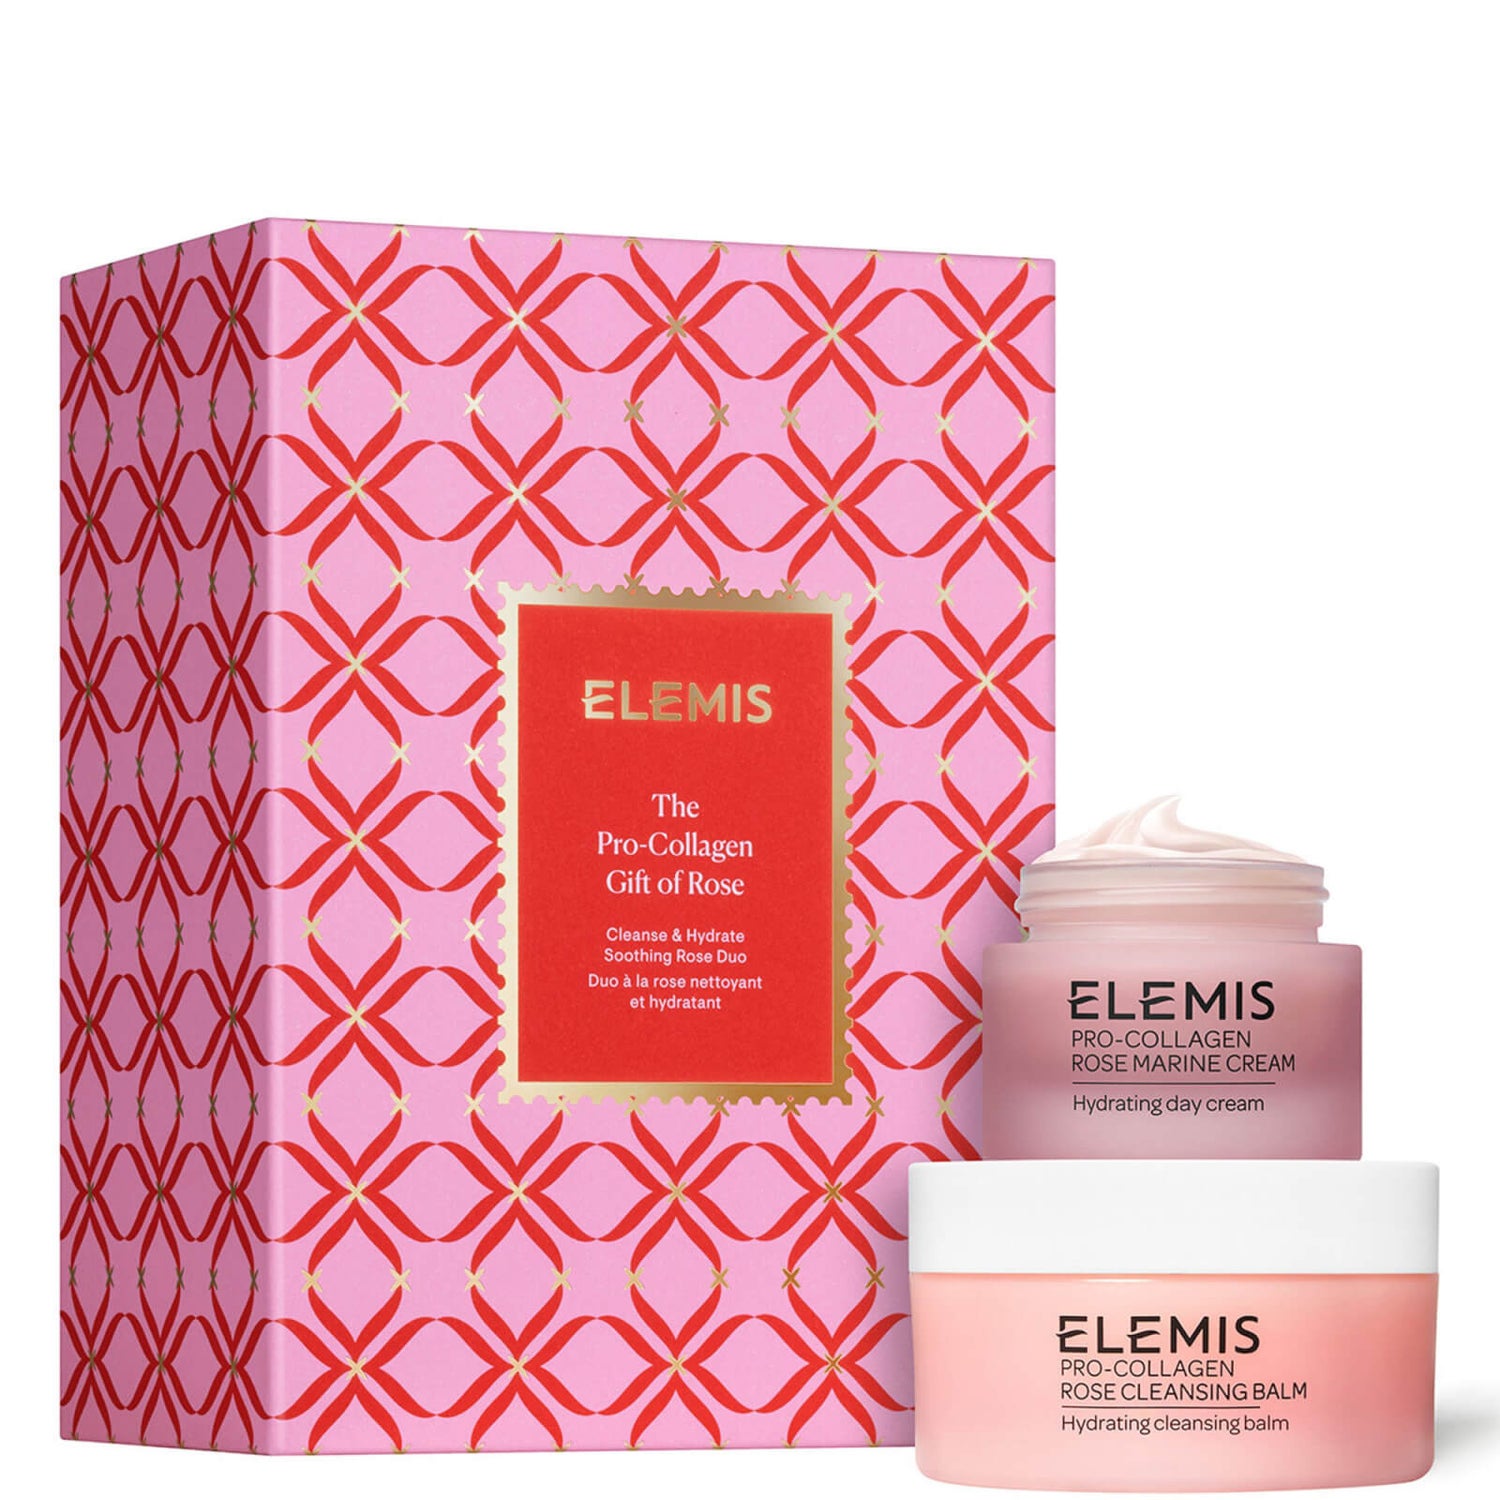 Elemis The Pro-Collagen Gift of Rose (Worth £91.00) - LOOKFANTASTIC